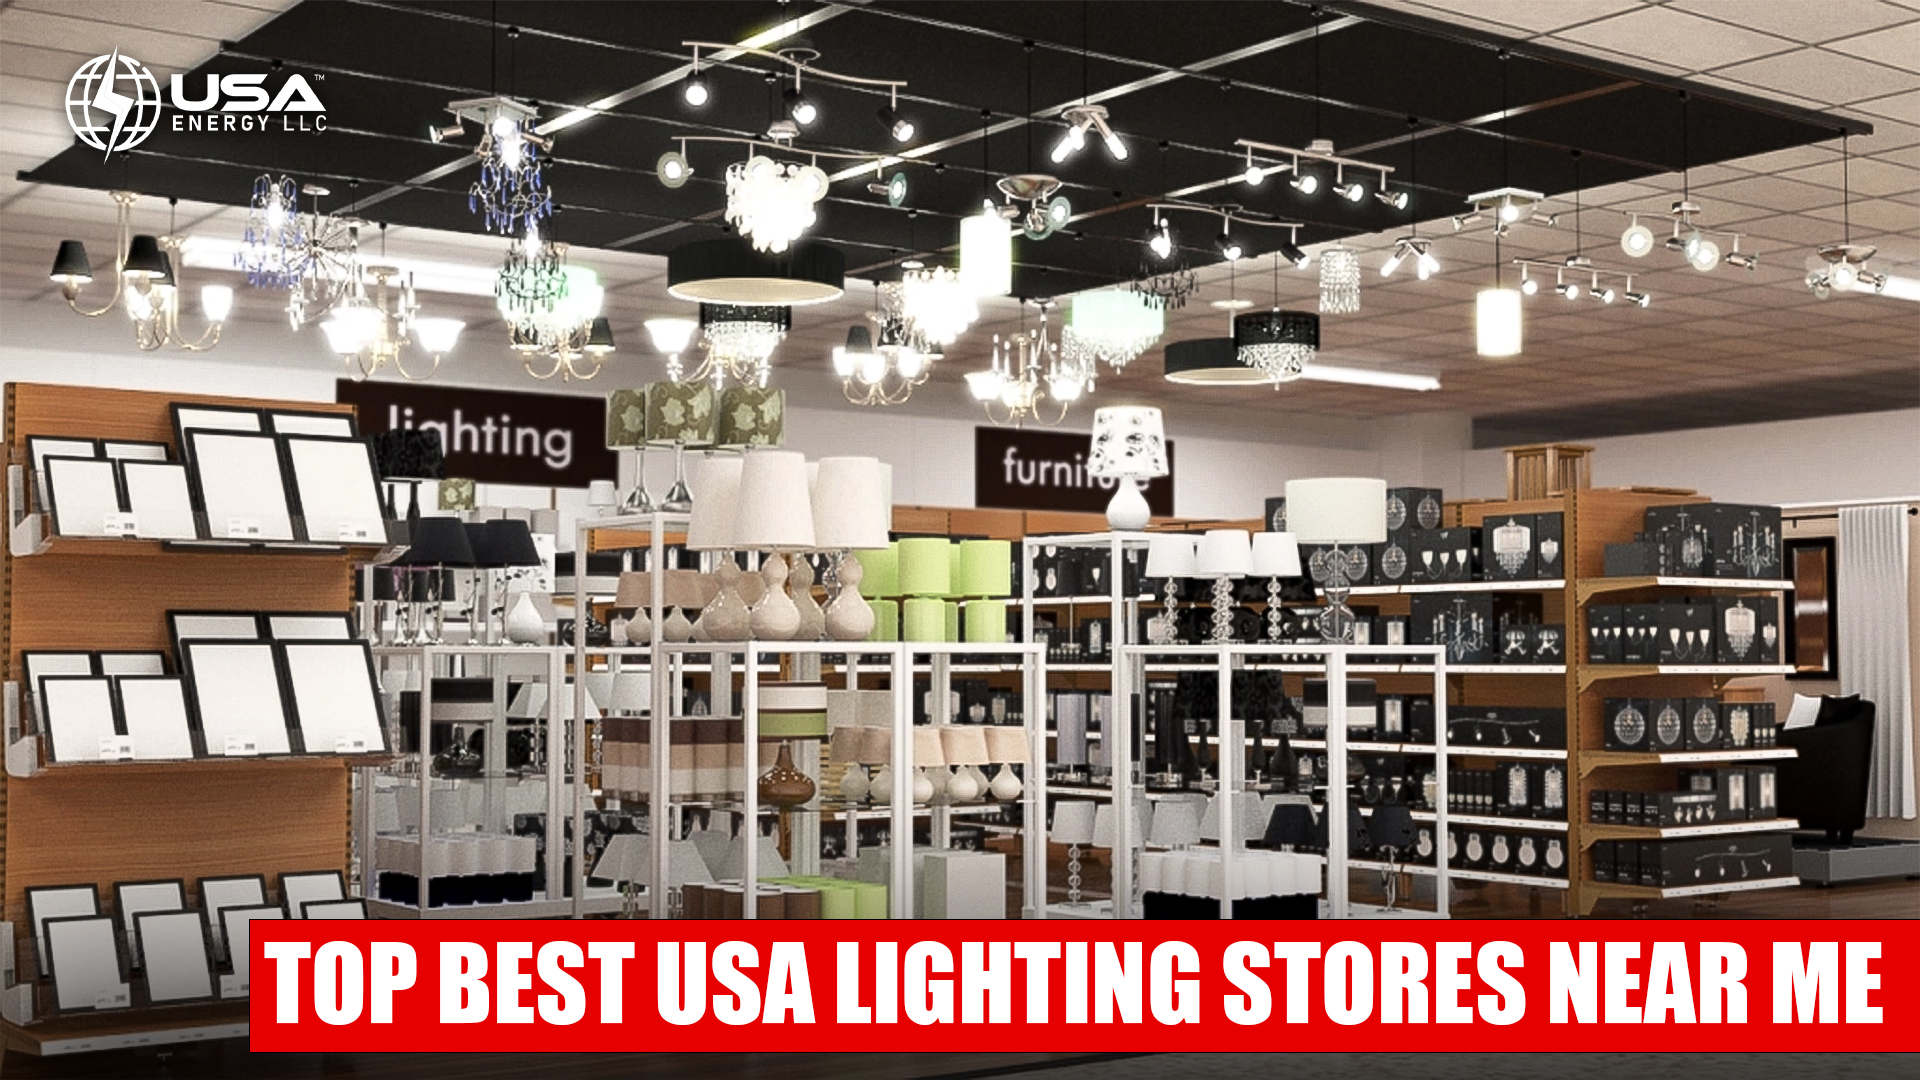 Top Best USA Lighting Stores near me